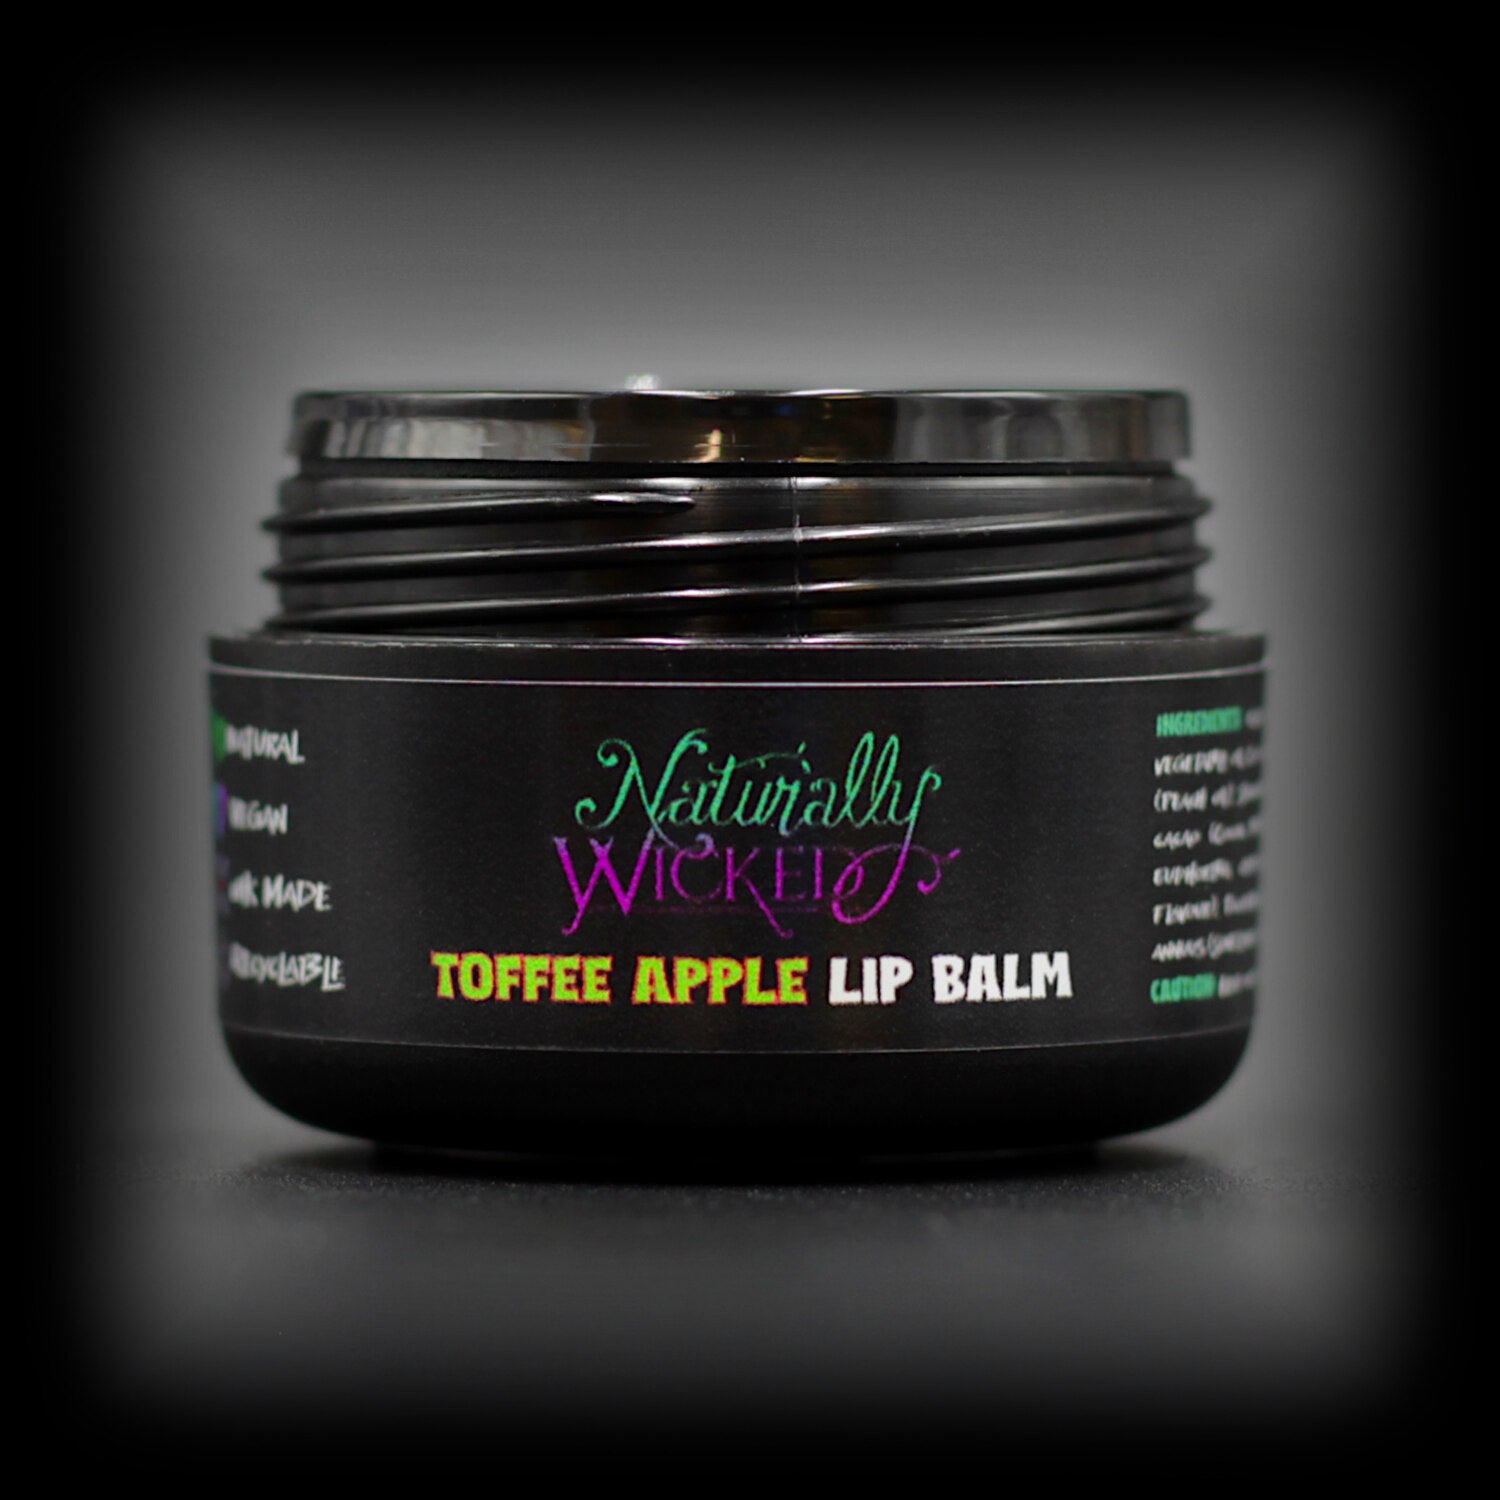 Naturally Wicked Toffee Apple Lip Balm Without Lid, Exposing Inner Luxury Lip Balm Seal